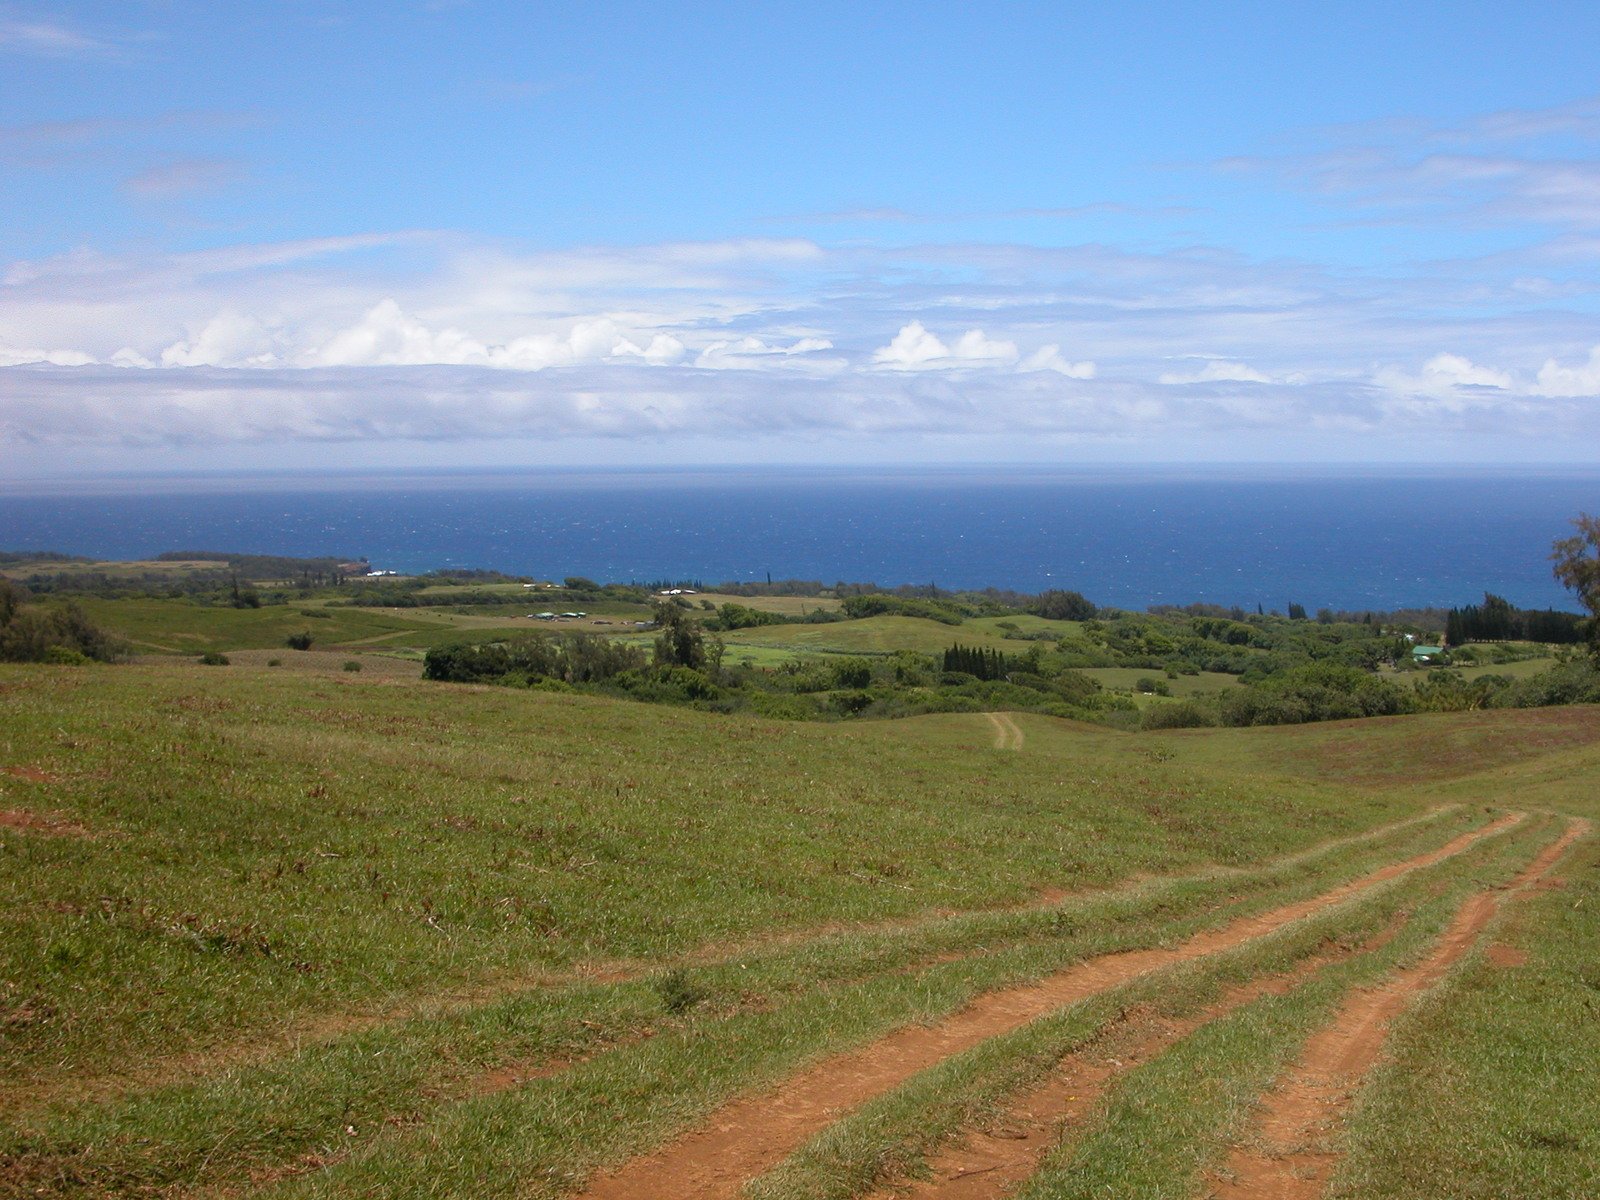 a dirt road through the field with ocean in the background